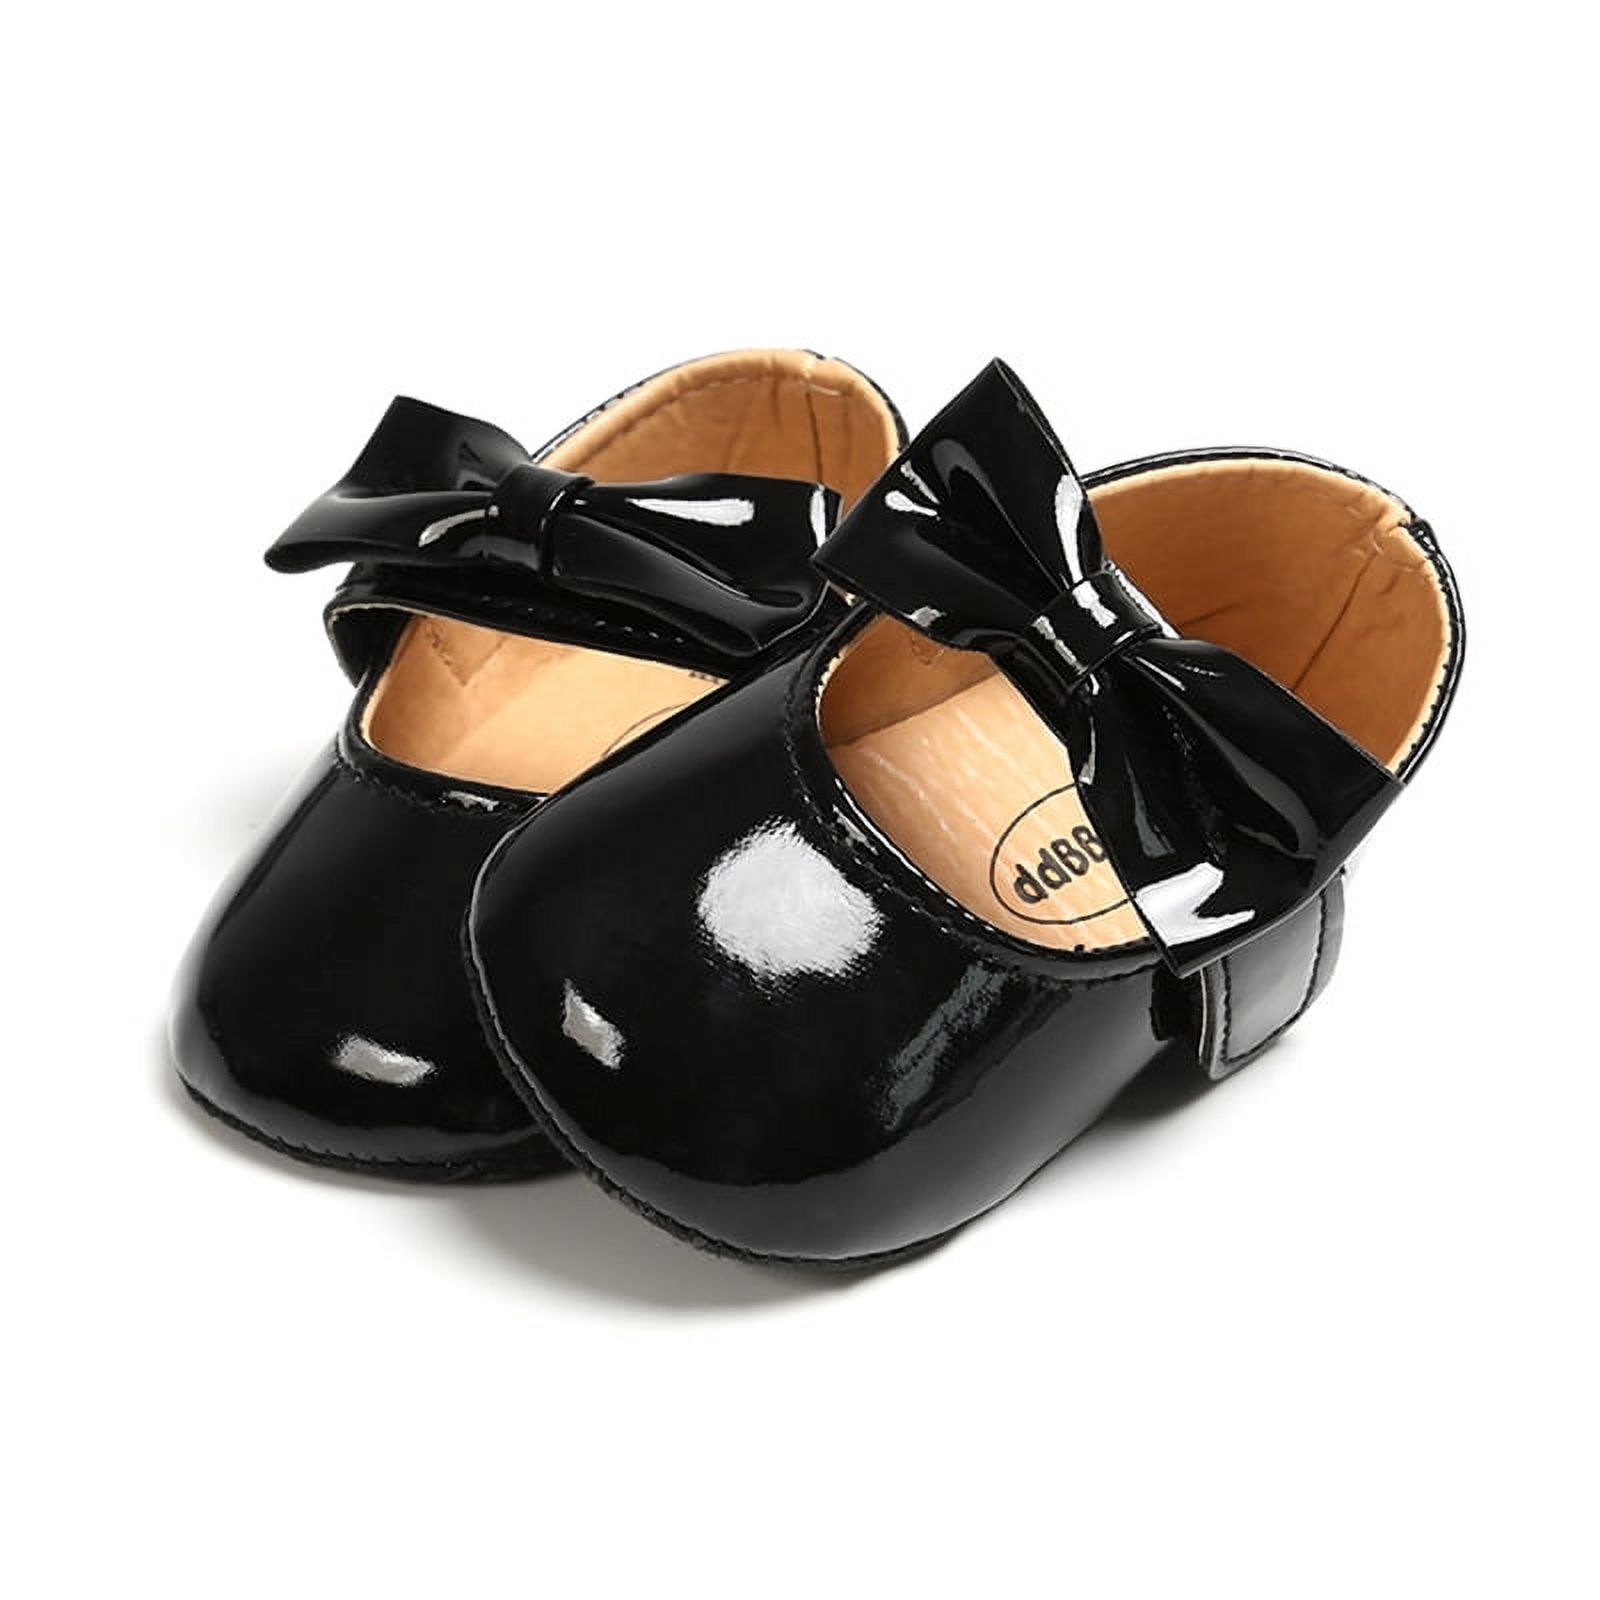 Infant Toddler Baby Girl's Soft Sole Anti-Slip Casual Shoes PU Leather Bowknot Princess Shoes - image 2 of 7